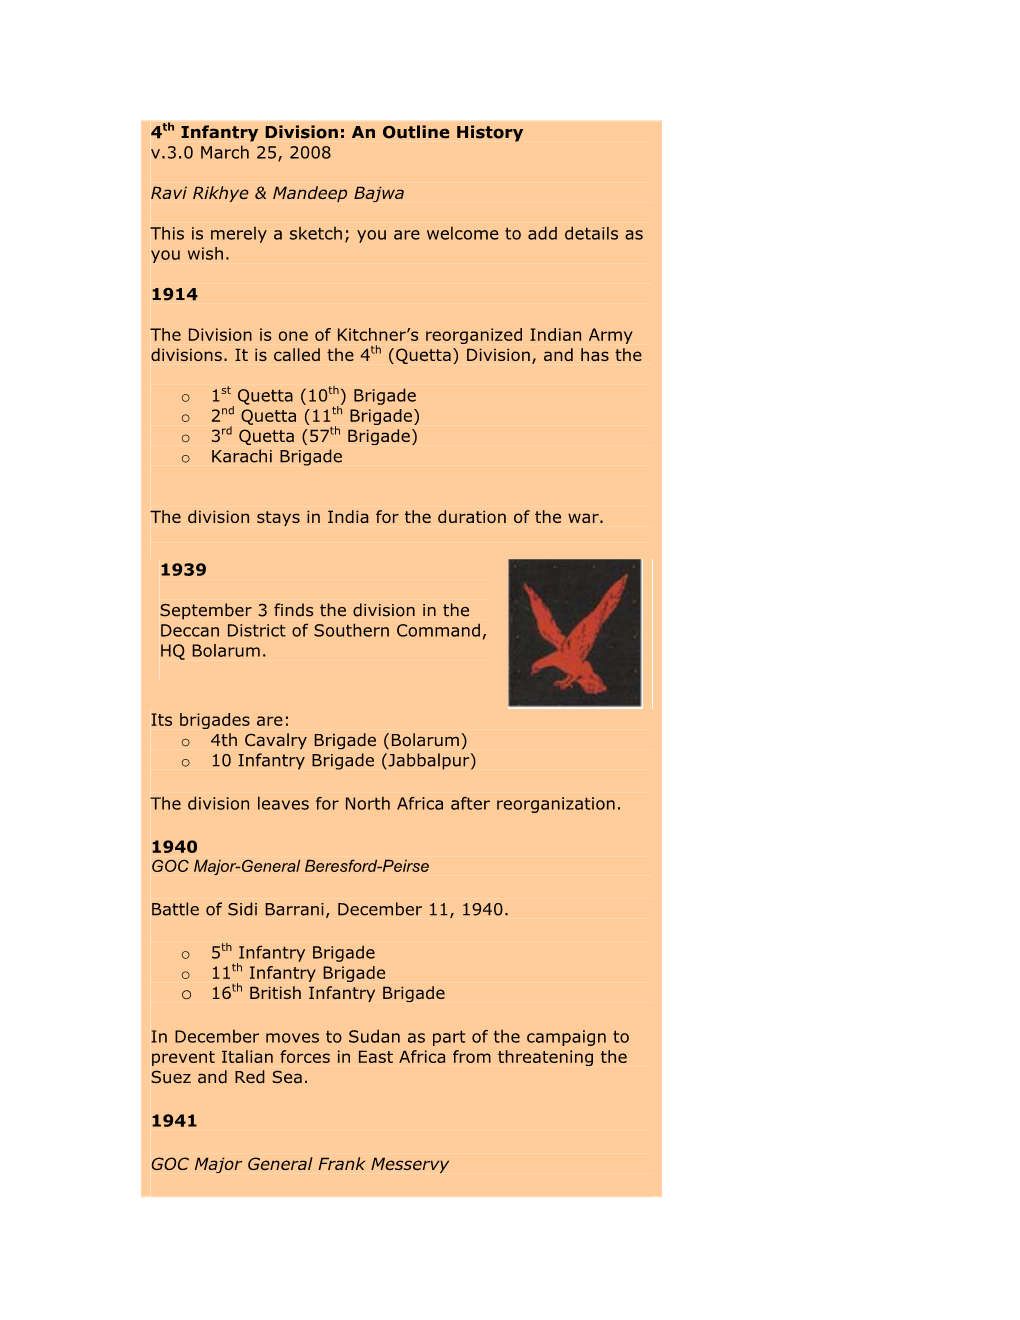 4Th Infantry Division: an Outline History V.3.0 March 25, 2008